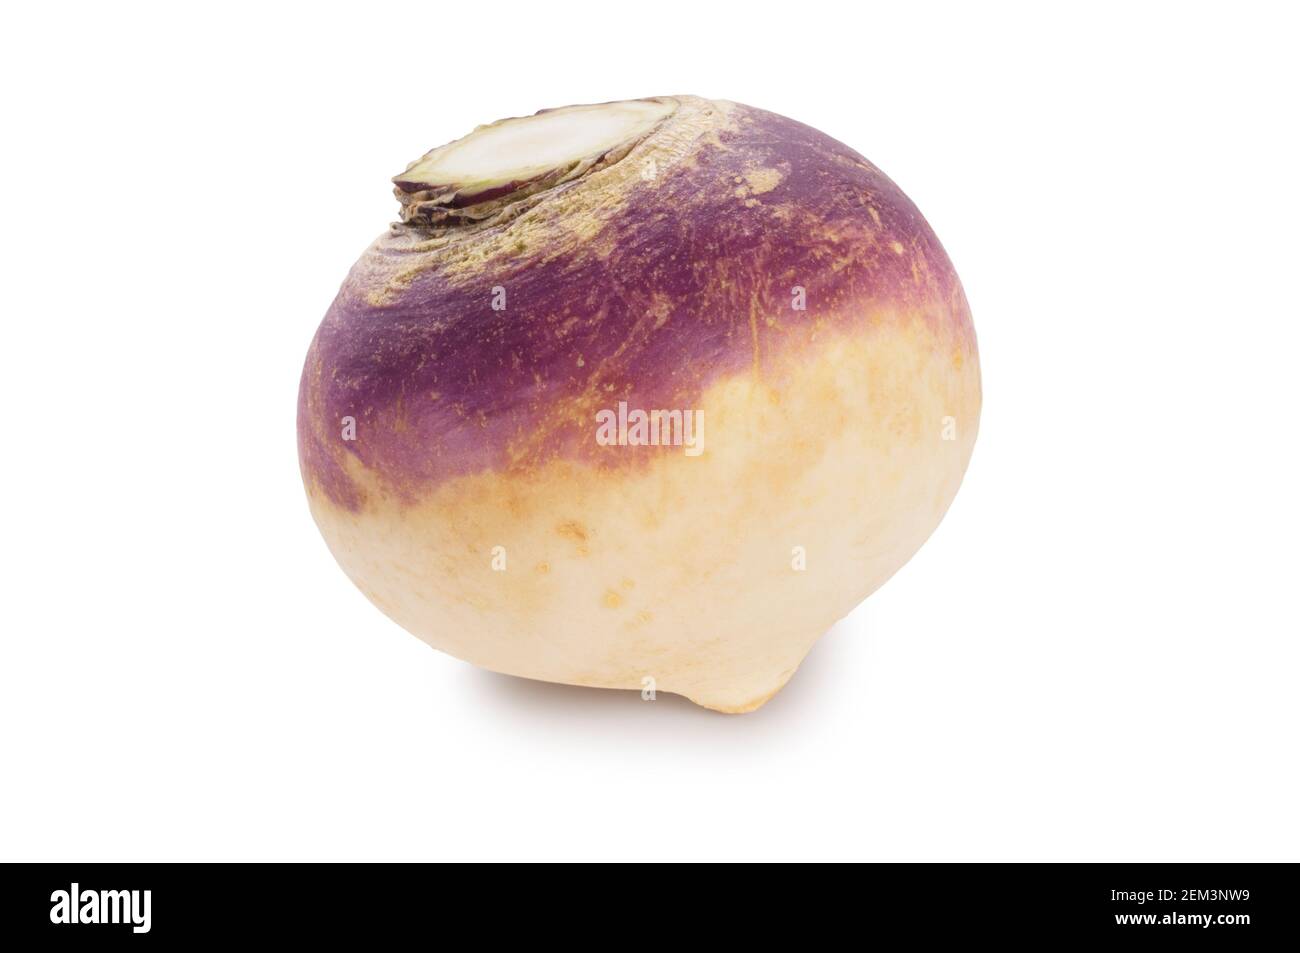 Studio shot of a turnip cut out against a white background - John Gollop Stock Photo